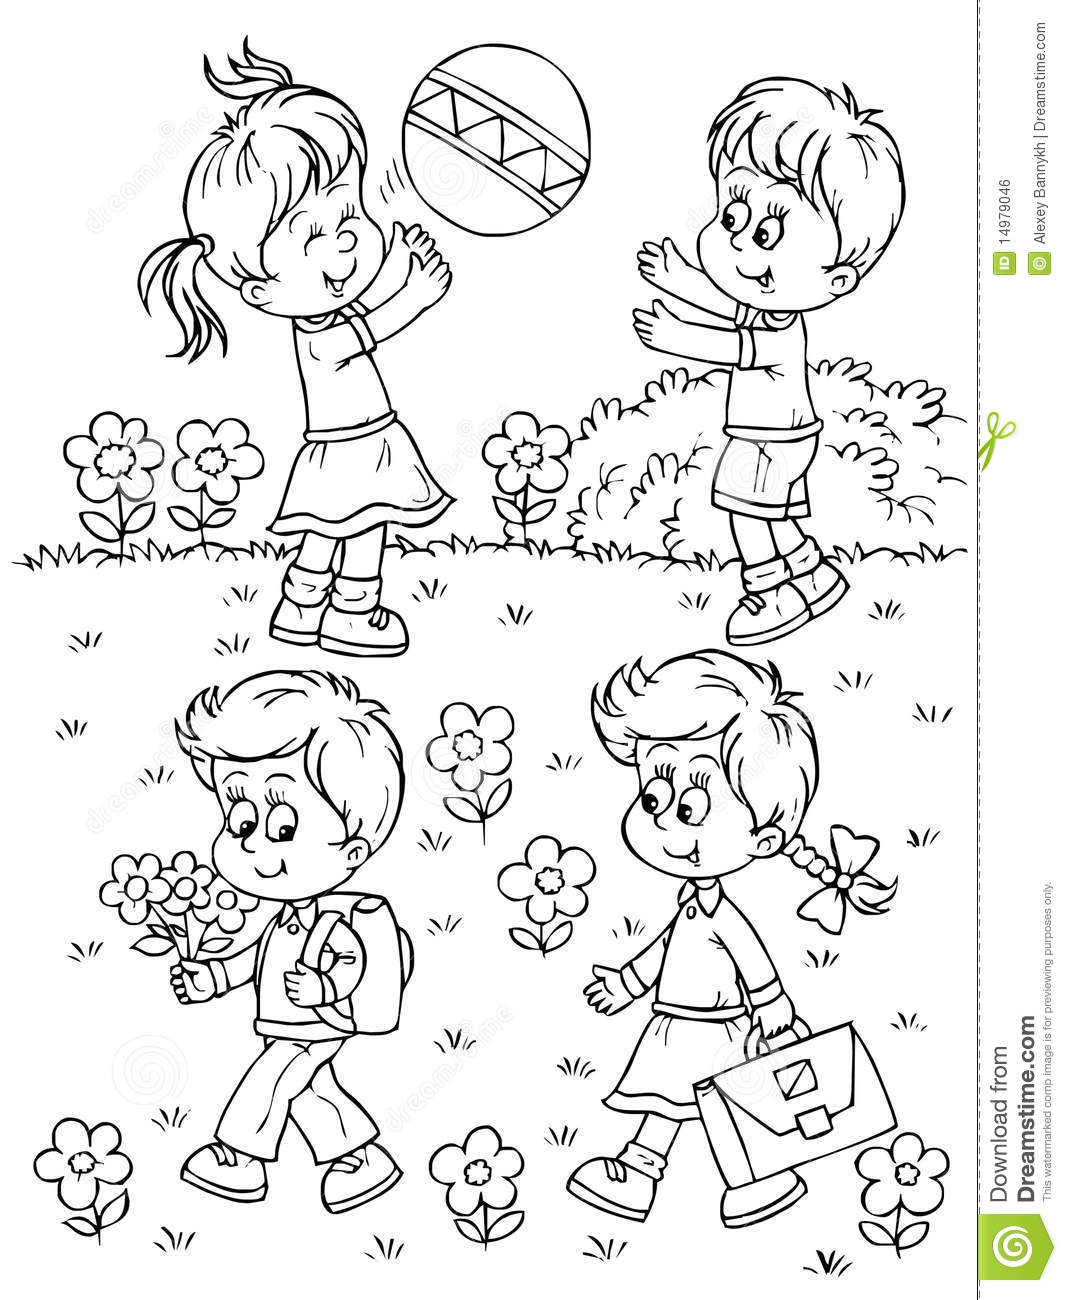 Black And White Illustration  Coloring Page   Boys And Girls Play On A